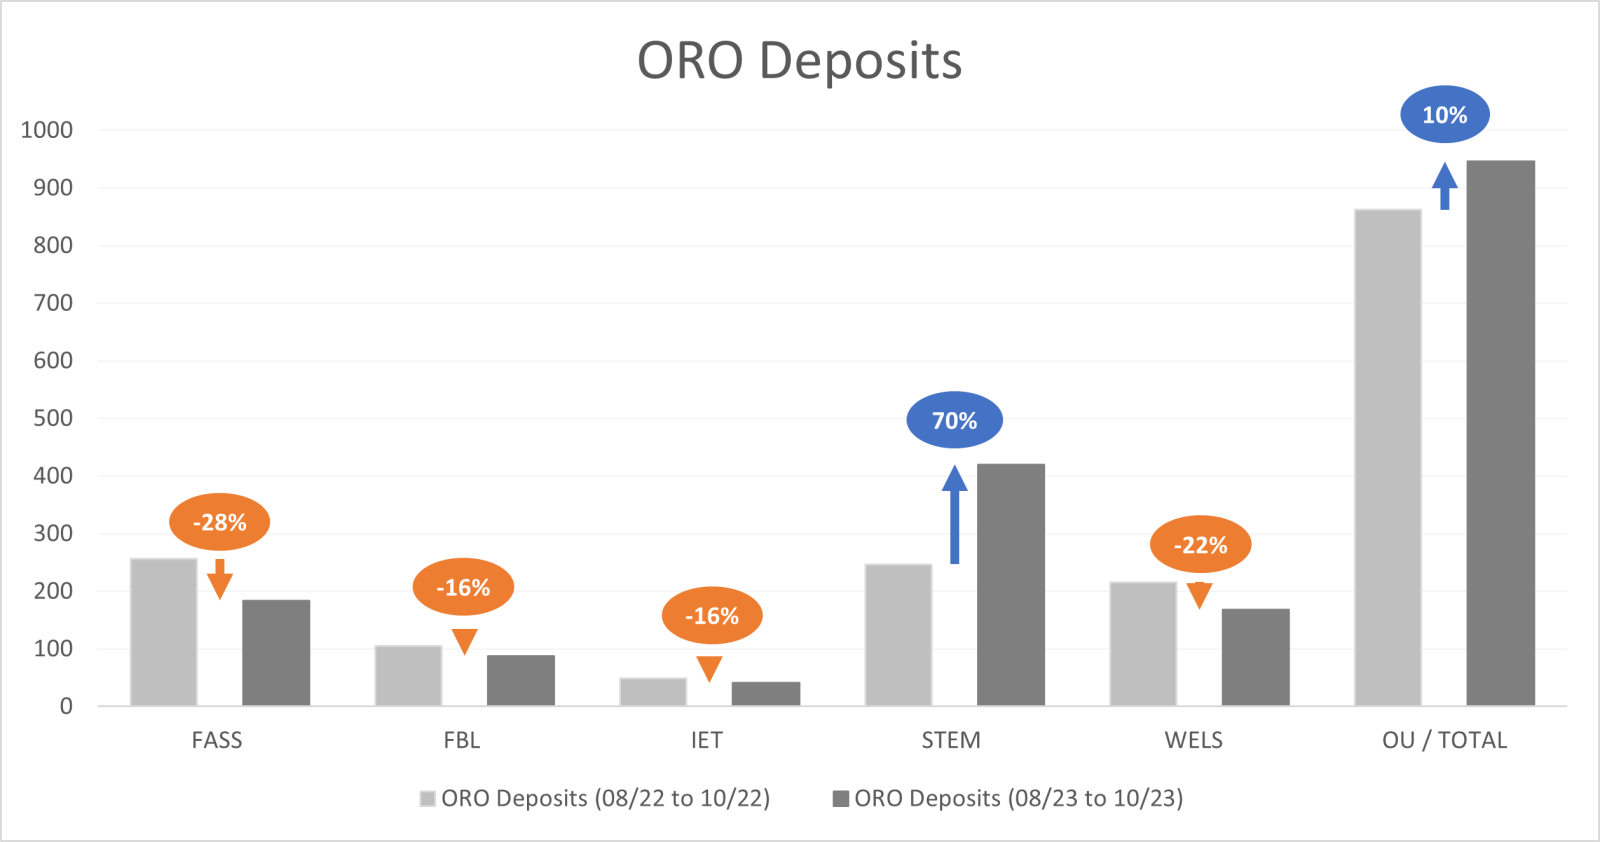 Bar chart depicting ORO deposits between August 2023 and October 2023